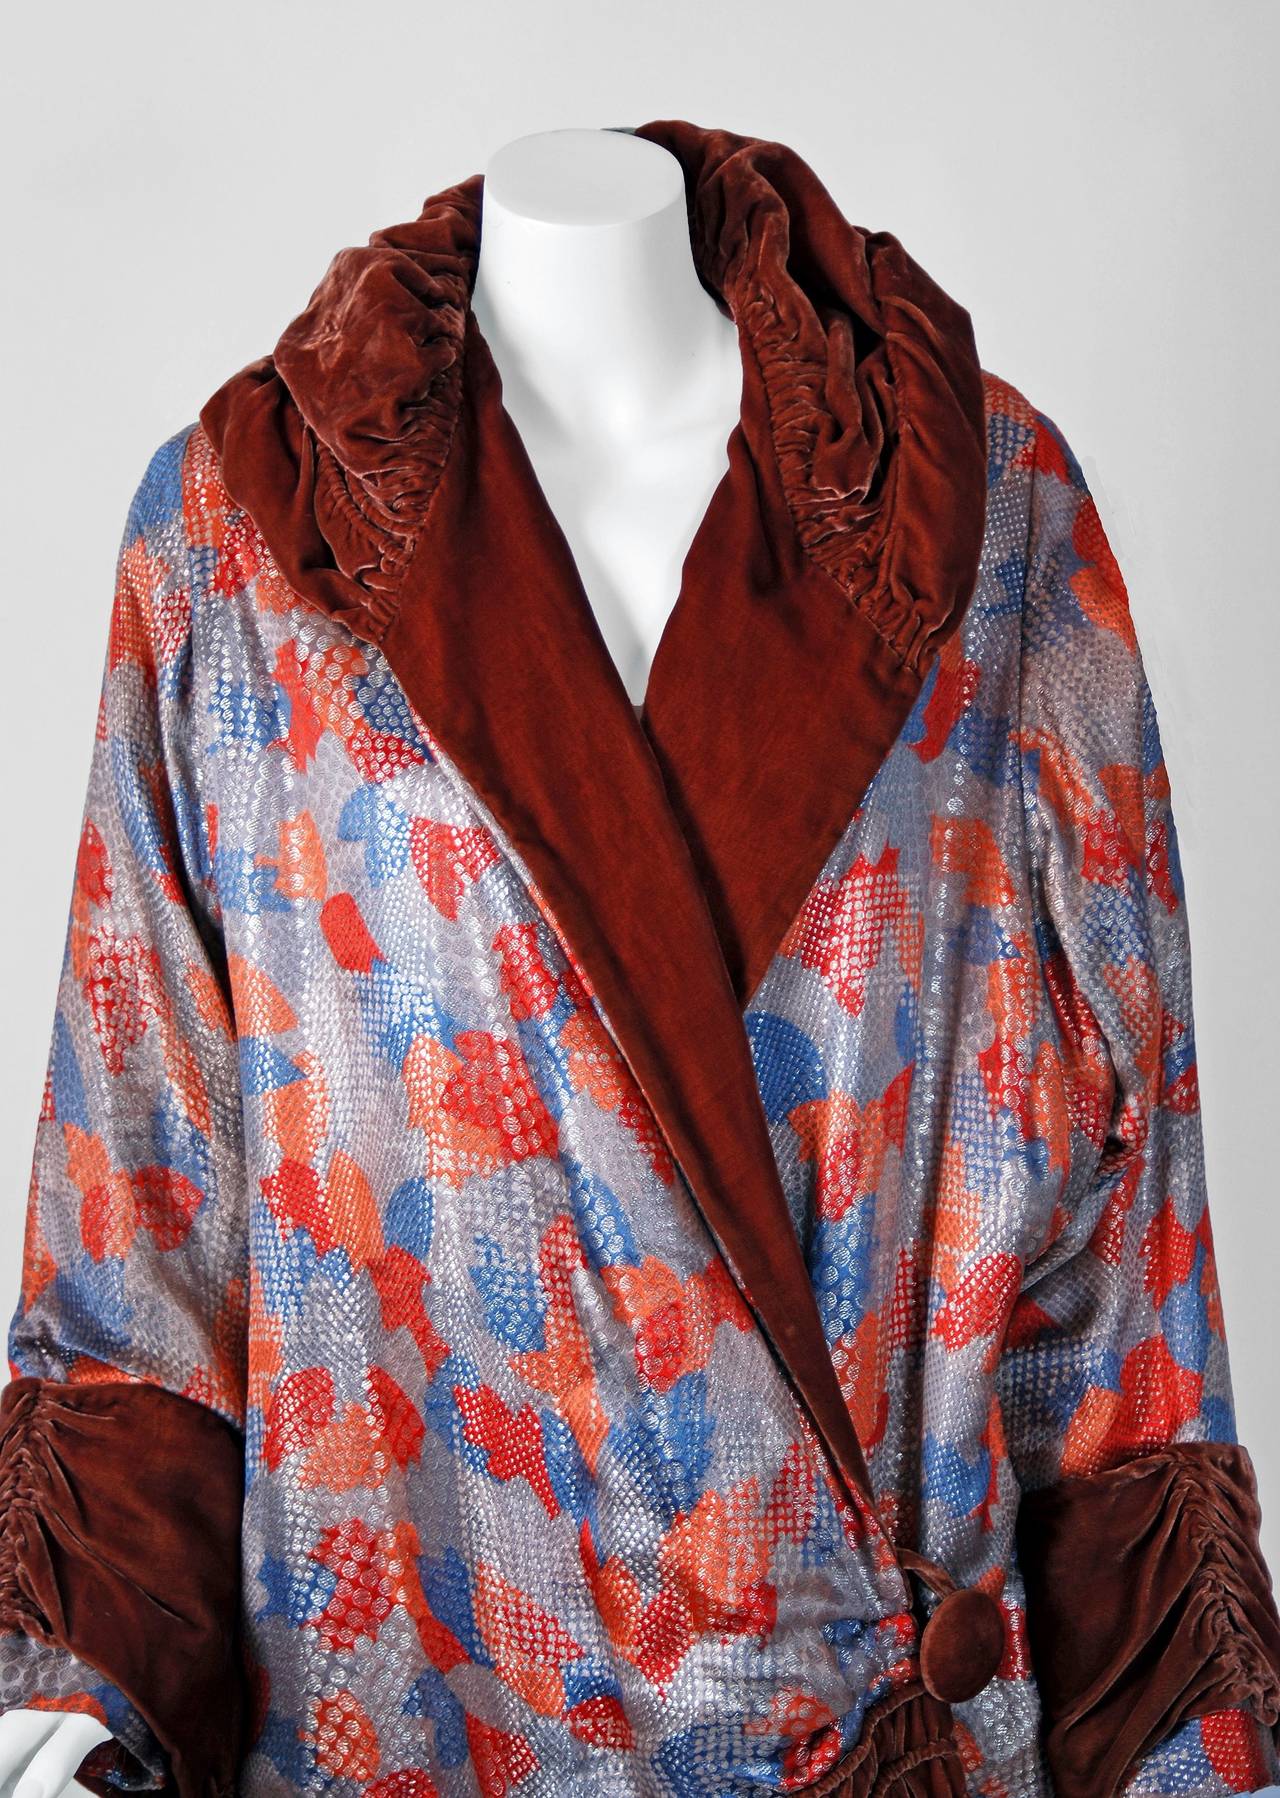 This breathtaking and unbelievable French metallic art-deco patterned lame & cinnamon silk-velvet coat will make any woman shine during the upcoming winter months.  The metallic shimmer adds a perfect amount of sparkle to this luxury treasure. I